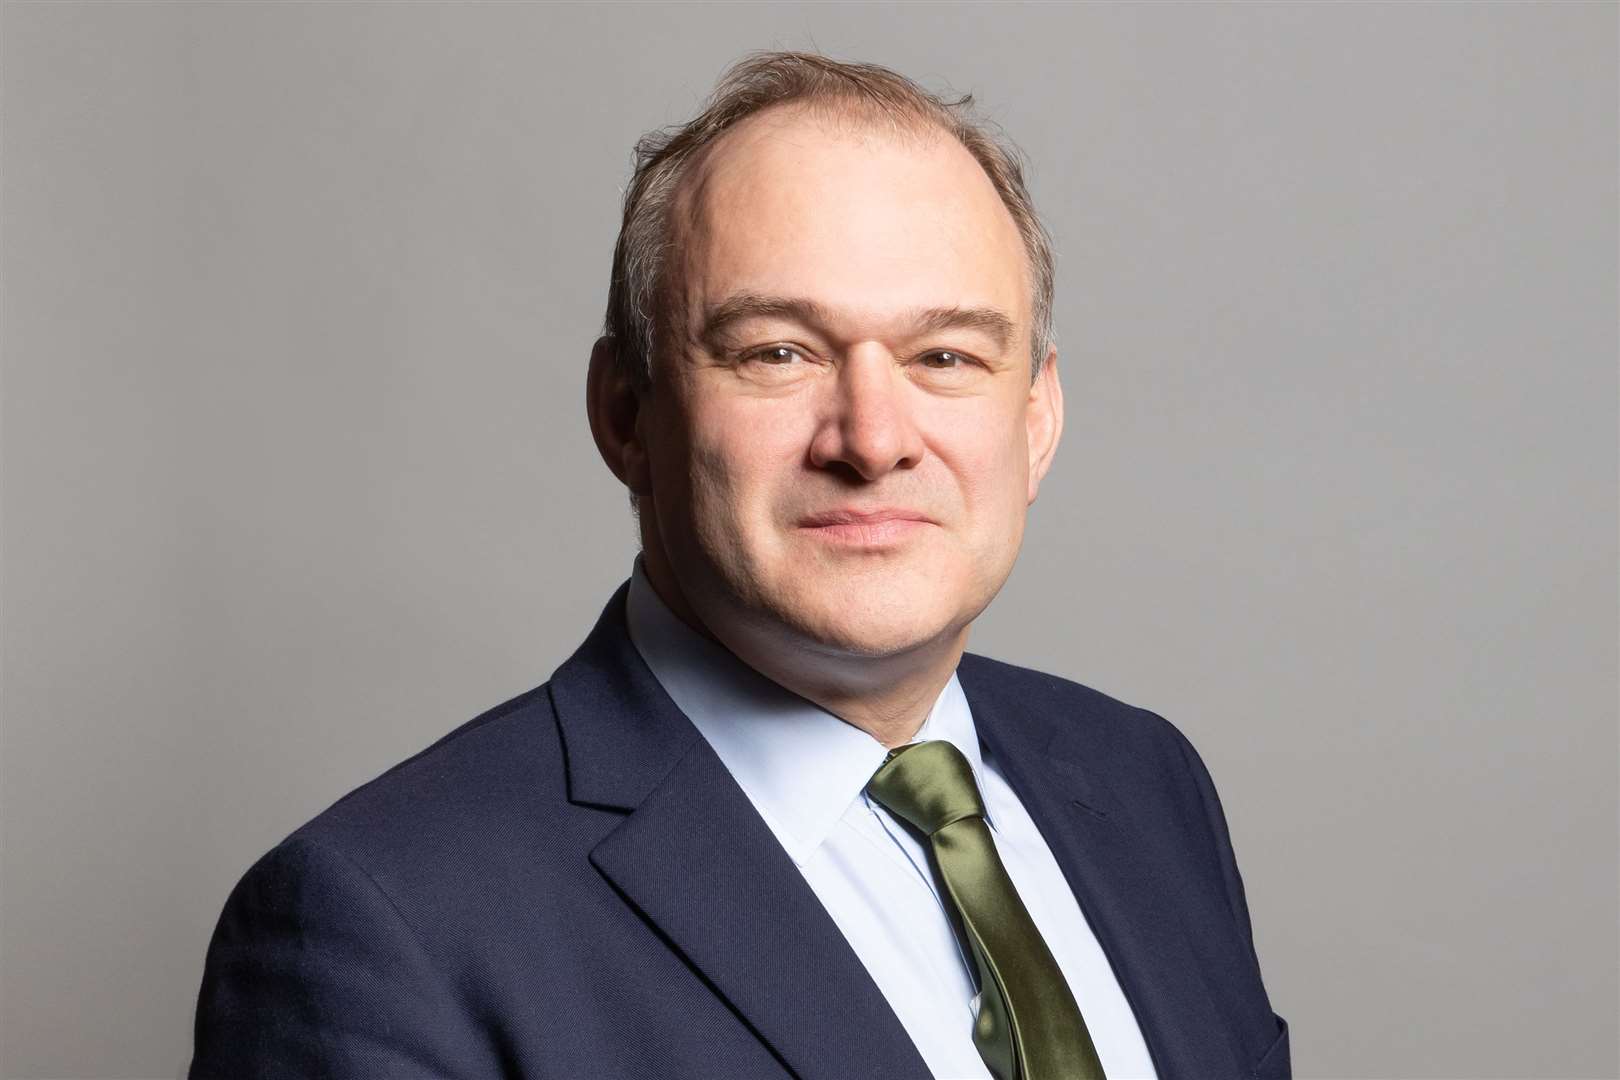 Ed Davey, the Liberal Democrats leader, is rather low key